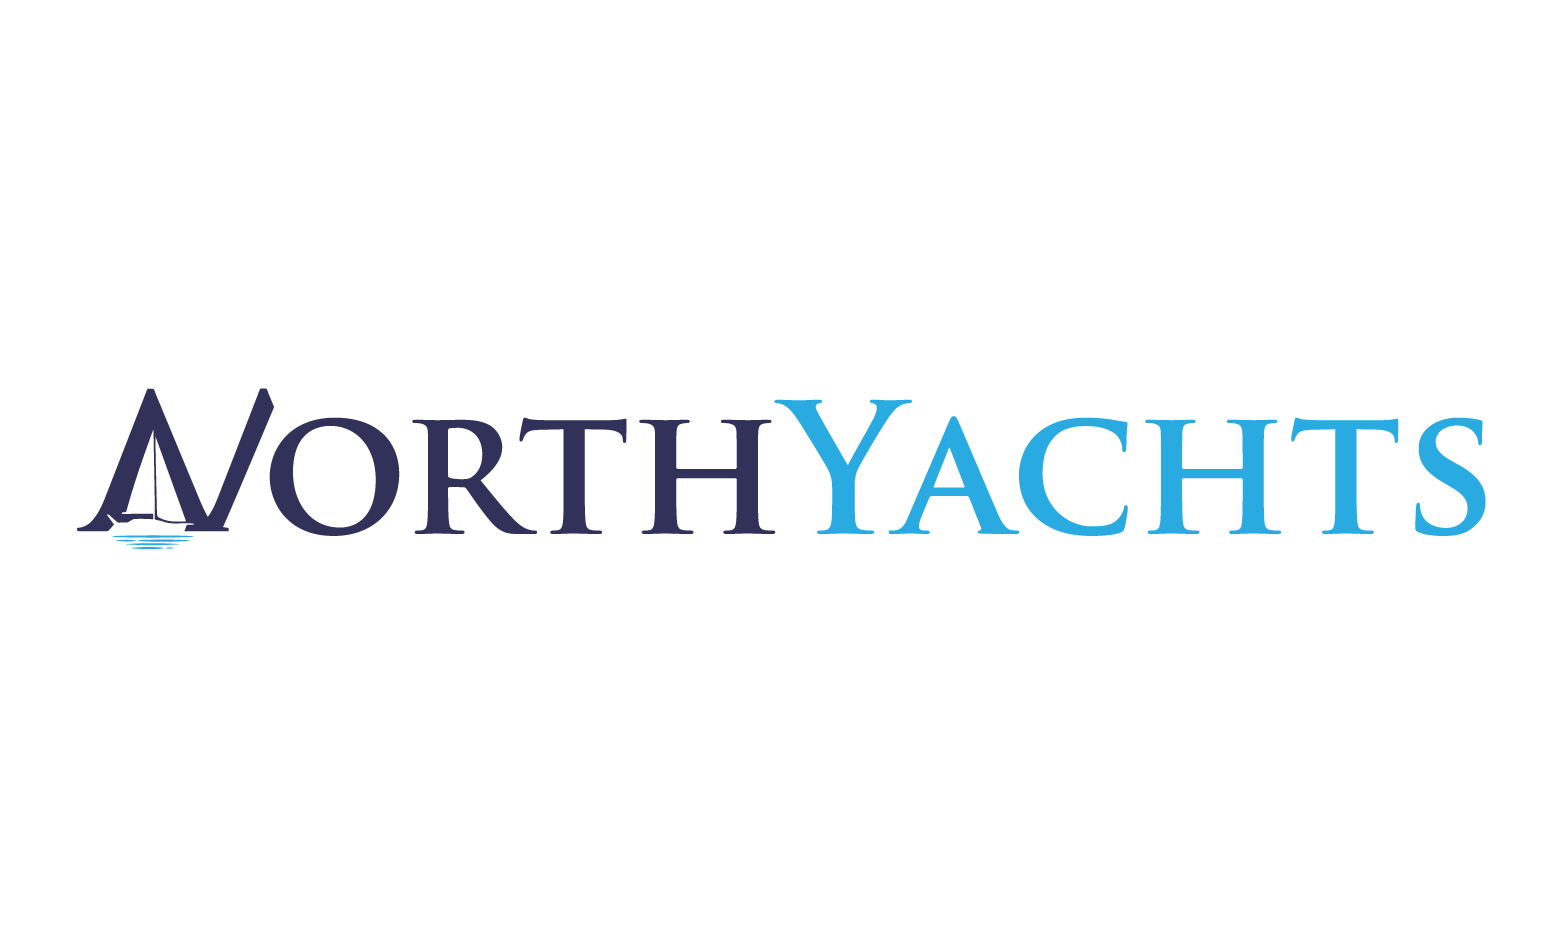 NorthYachts.com - Creative brandable domain for sale